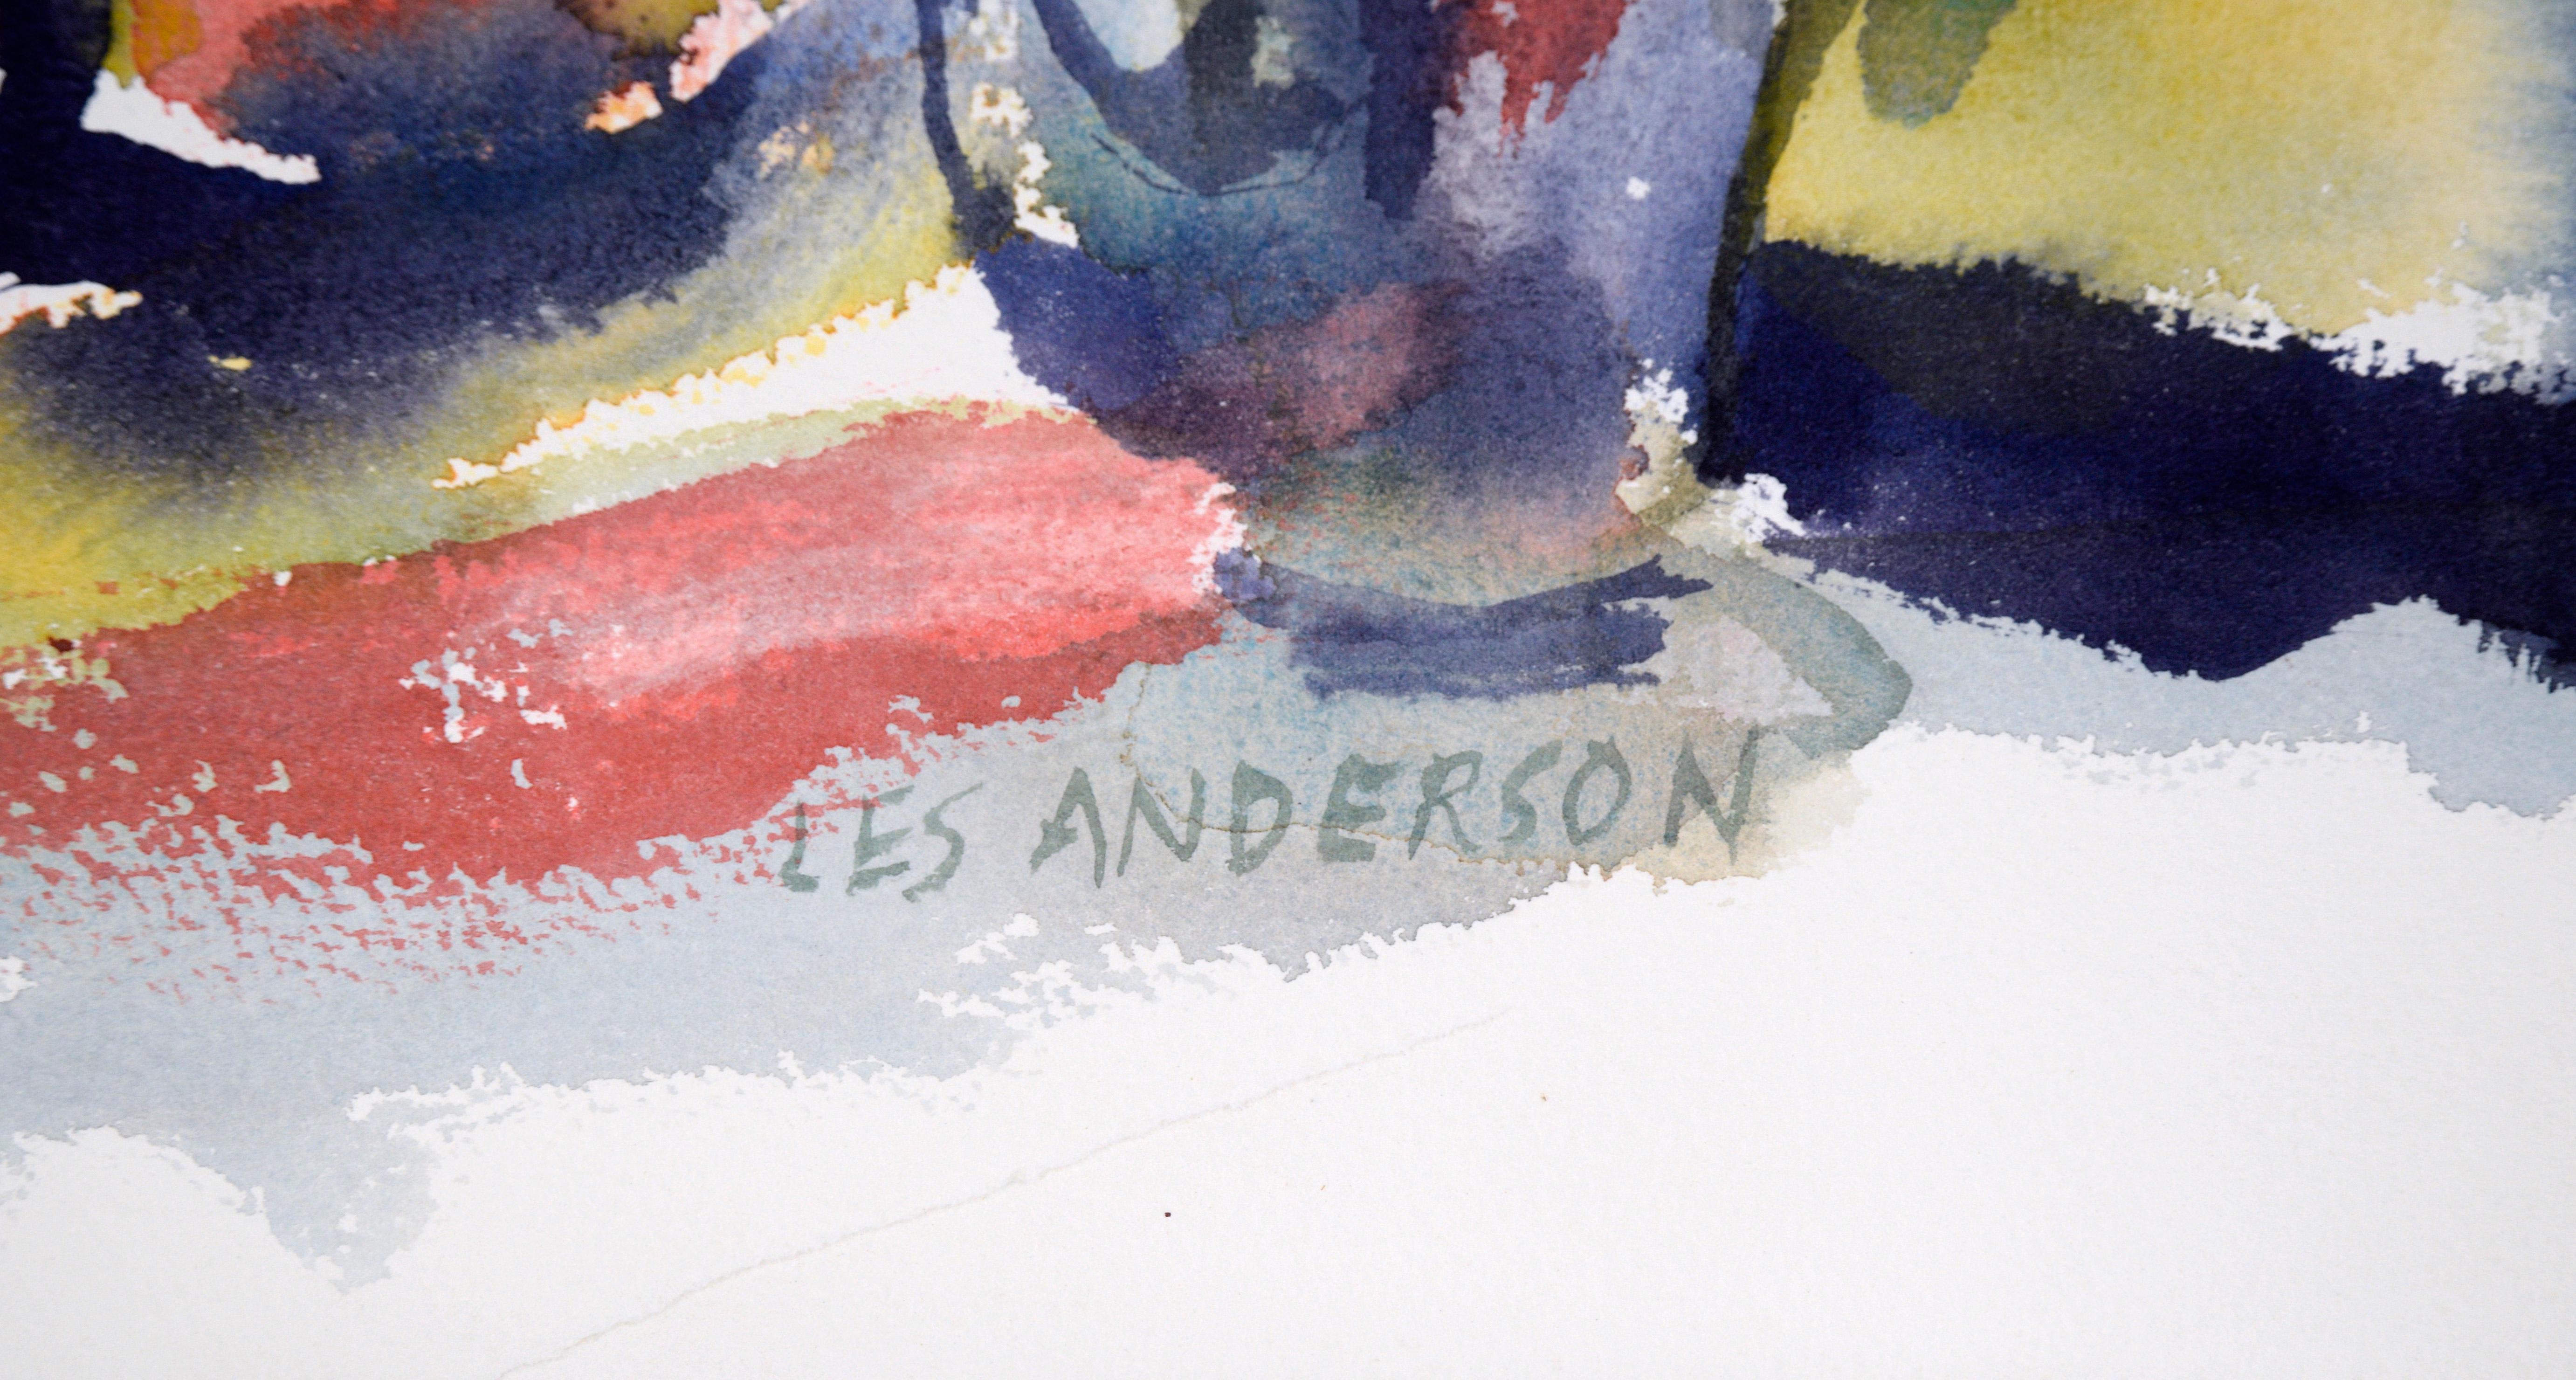 Abstract Still Life with Bouquet and Teapot in Watercolor on Paper - American Impressionist Art by Les Anderson